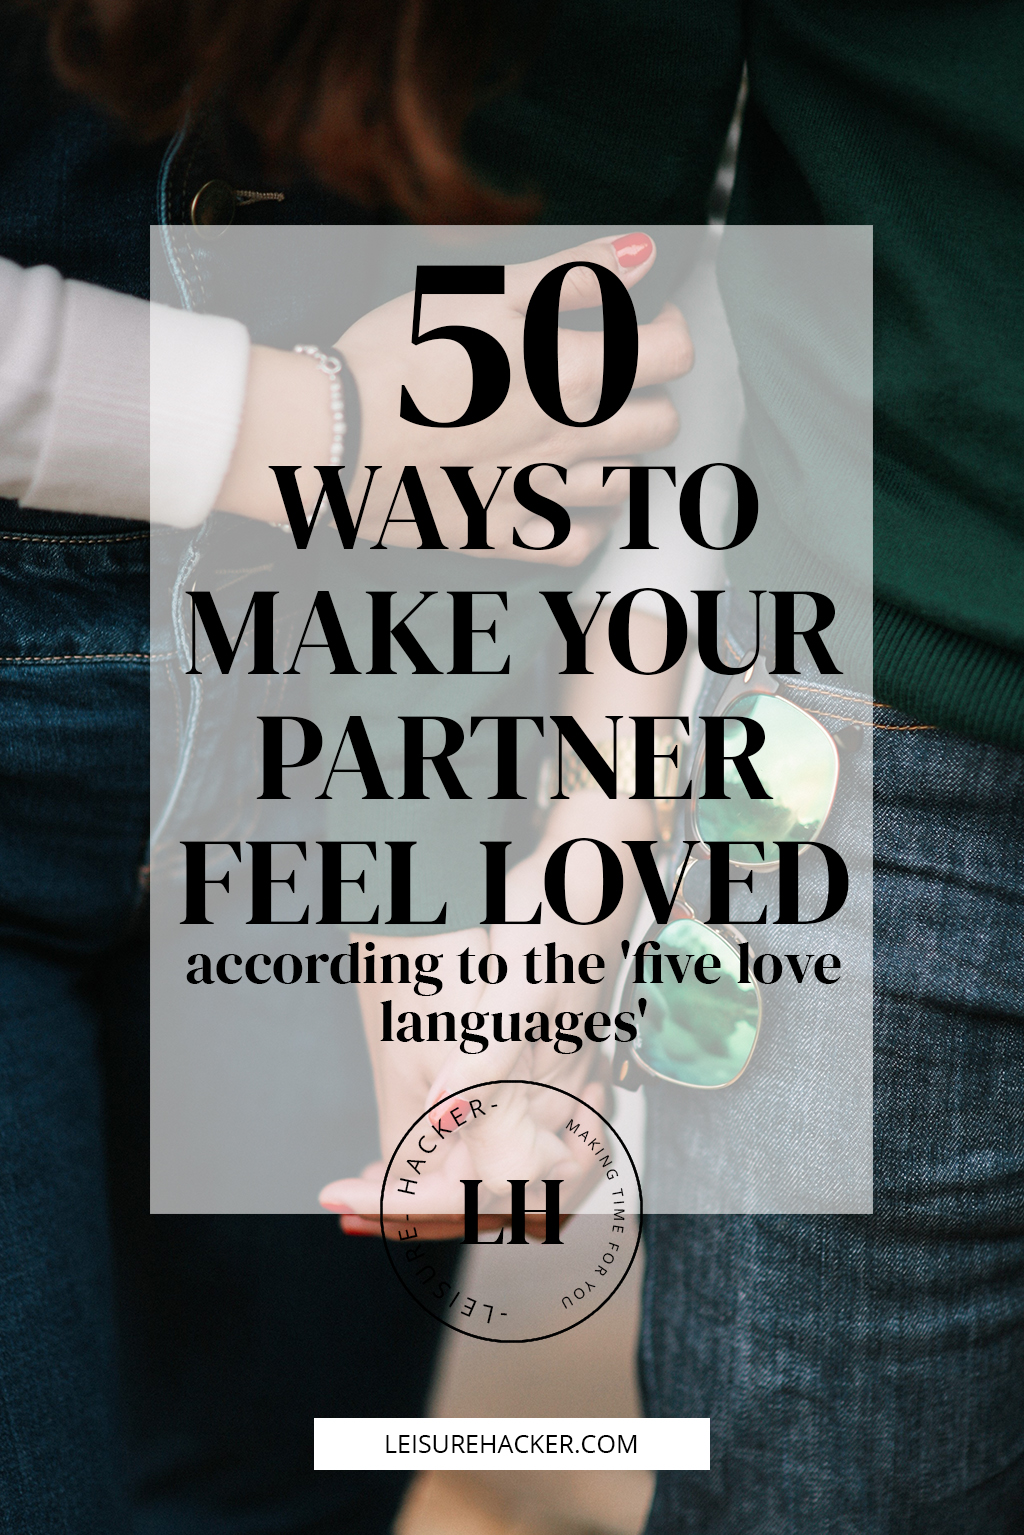 50 ways to make your partner feel loved according to the 'five love languages'